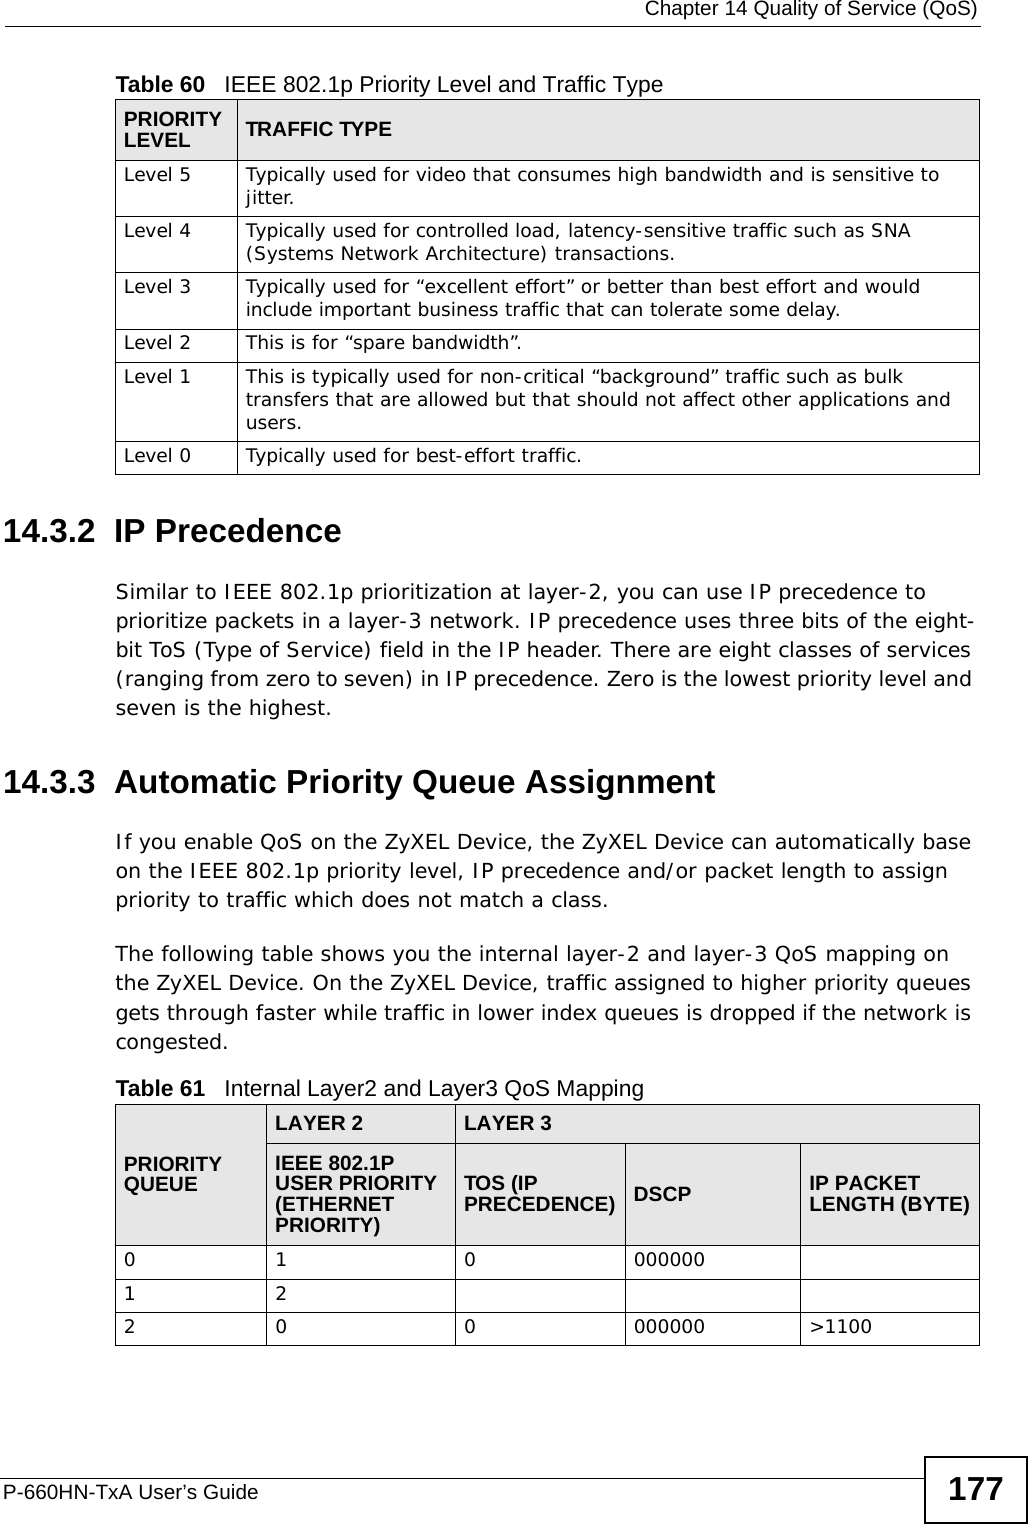  Chapter 14 Quality of Service (QoS)P-660HN-TxA User’s Guide 17714.3.2  IP PrecedenceSimilar to IEEE 802.1p prioritization at layer-2, you can use IP precedence to prioritize packets in a layer-3 network. IP precedence uses three bits of the eight-bit ToS (Type of Service) field in the IP header. There are eight classes of services (ranging from zero to seven) in IP precedence. Zero is the lowest priority level and seven is the highest.14.3.3  Automatic Priority Queue AssignmentIf you enable QoS on the ZyXEL Device, the ZyXEL Device can automatically base on the IEEE 802.1p priority level, IP precedence and/or packet length to assign priority to traffic which does not match a class.The following table shows you the internal layer-2 and layer-3 QoS mapping on the ZyXEL Device. On the ZyXEL Device, traffic assigned to higher priority queues gets through faster while traffic in lower index queues is dropped if the network is congested.Level 5 Typically used for video that consumes high bandwidth and is sensitive to jitter.Level 4 Typically used for controlled load, latency-sensitive traffic such as SNA (Systems Network Architecture) transactions.Level 3 Typically used for “excellent effort” or better than best effort and would include important business traffic that can tolerate some delay.Level 2 This is for “spare bandwidth”. Level 1 This is typically used for non-critical “background” traffic such as bulk transfers that are allowed but that should not affect other applications and users. Level 0 Typically used for best-effort traffic.Table 60   IEEE 802.1p Priority Level and Traffic TypePRIORITY LEVEL TRAFFIC TYPETable 61   Internal Layer2 and Layer3 QoS MappingPRIORITY QUEUELAYER 2 LAYER 3IEEE 802.1P USER PRIORITY (ETHERNET PRIORITY)TOS (IP PRECEDENCE) DSCP IP PACKET LENGTH (BYTE)0 1 0 000000122 0 0 000000 &gt;1100